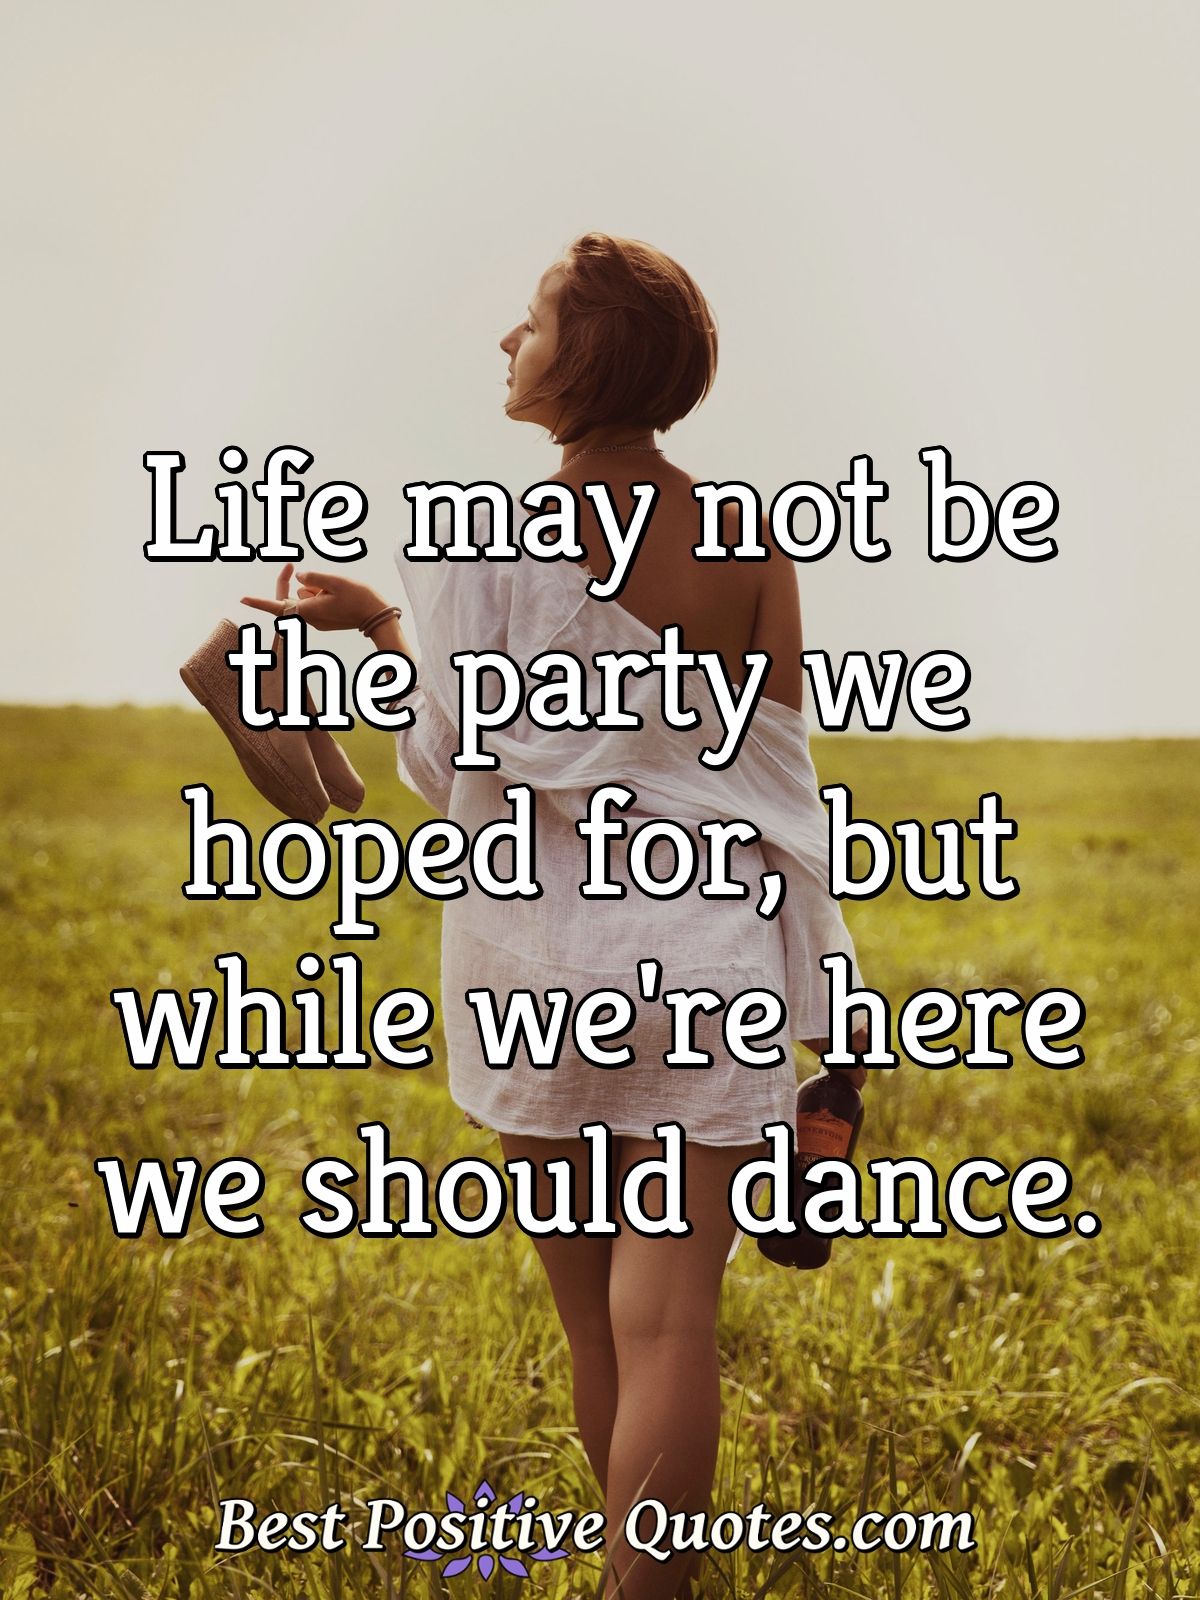 Life may not be the party we hoped for, but while we're here we should dance. - Anonymous